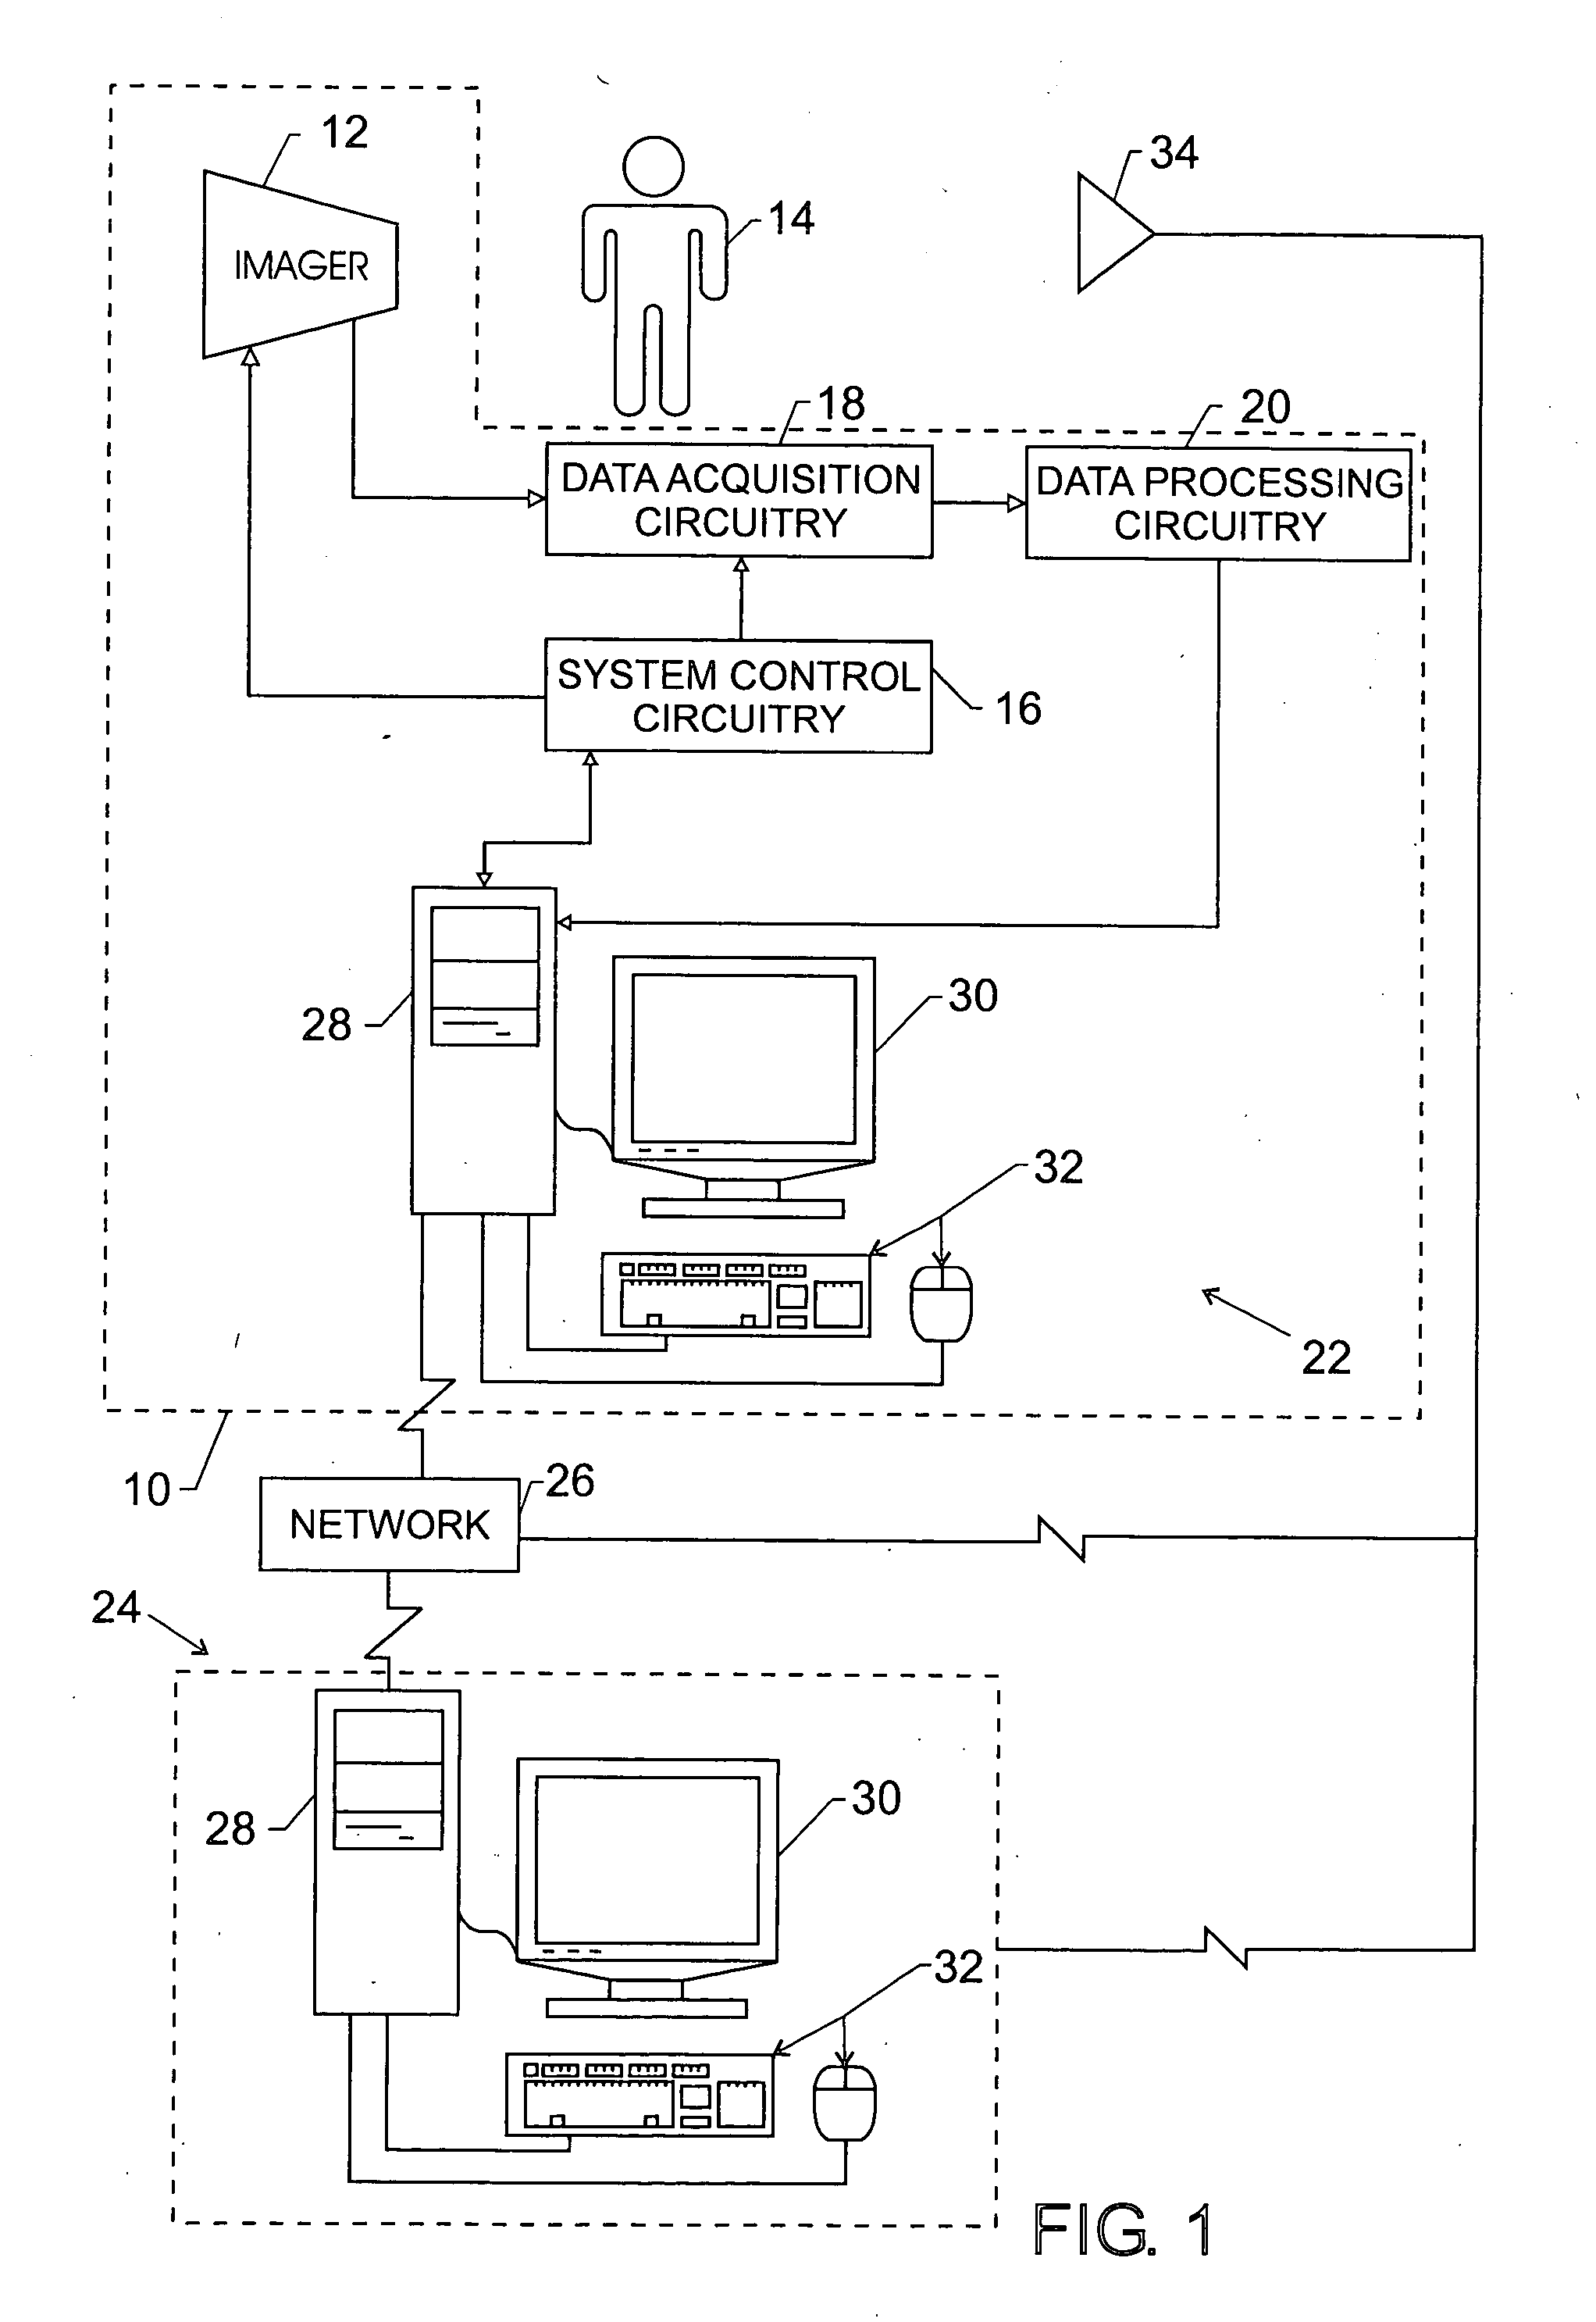 Method and system for remote operation of a medical imaging system